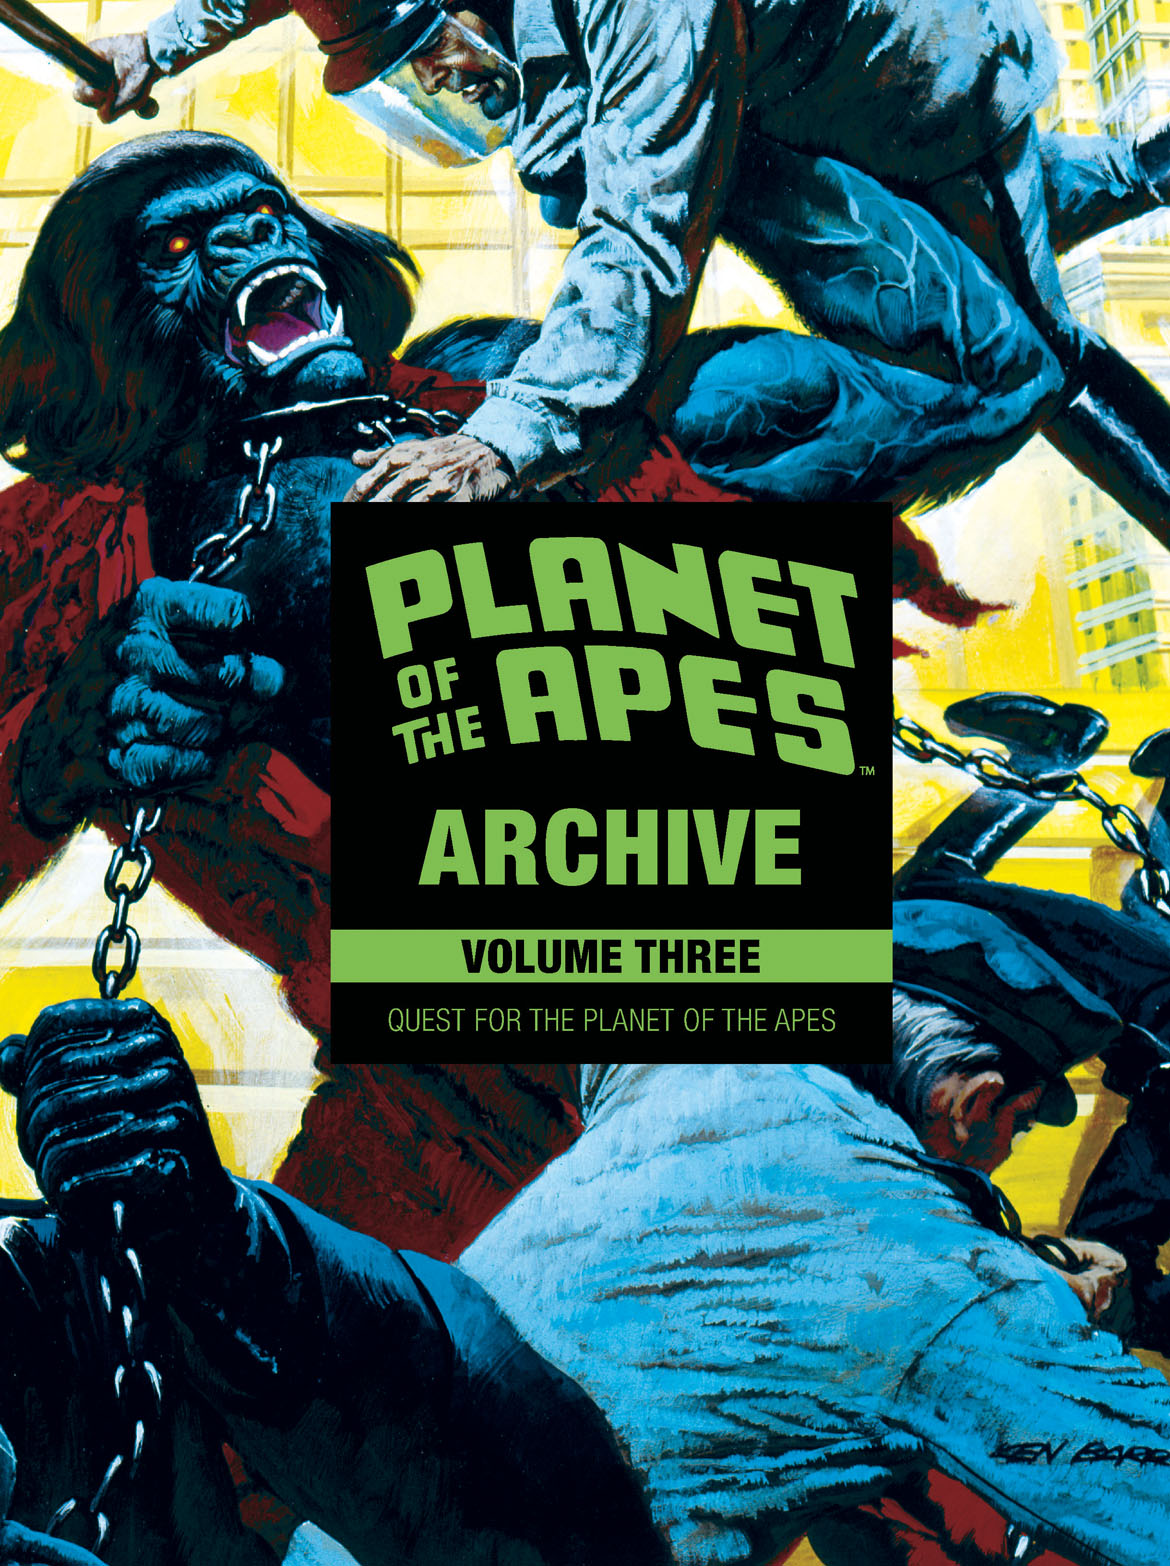 This image is the cover for the book Planet of the Apes Archive Vol. 3: Quest for the Planet of the Apes, Planet of the Apes Archive